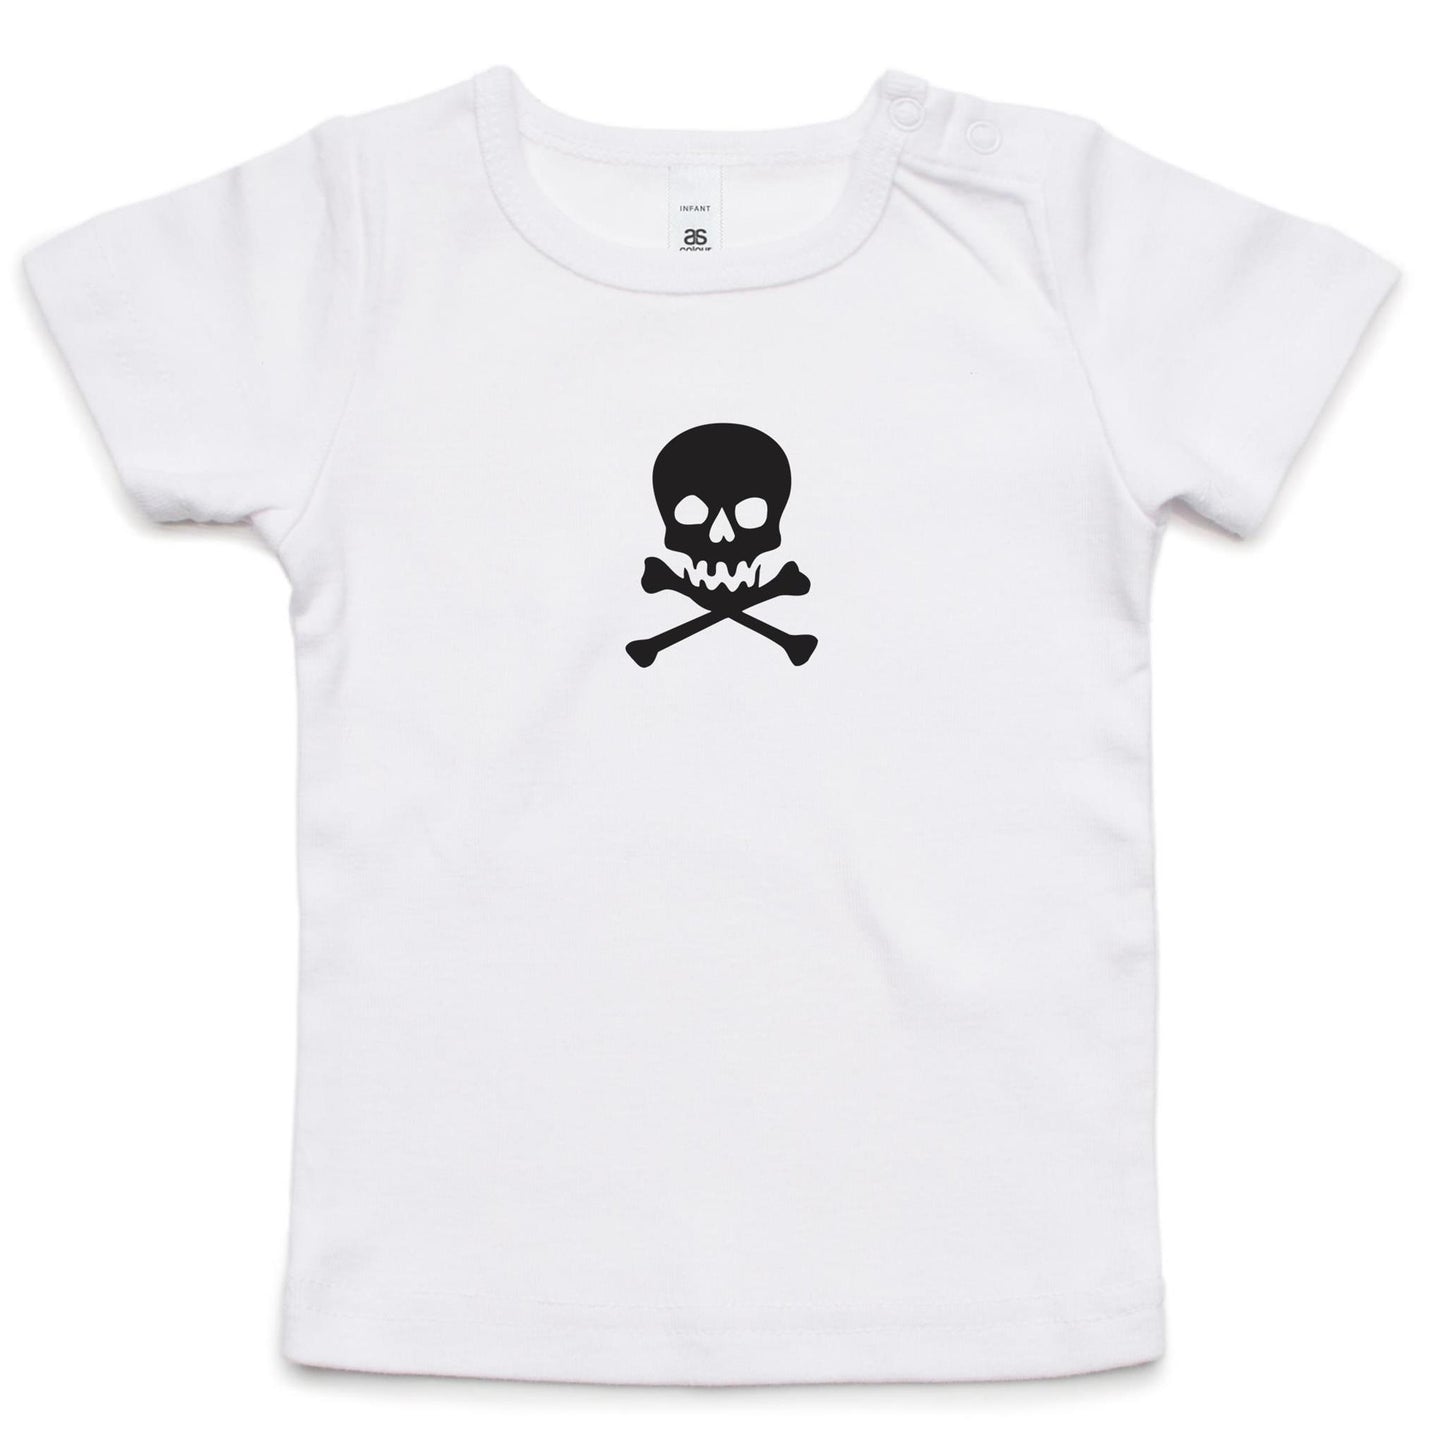 Skull and Cross Bones T Shirts for Babies